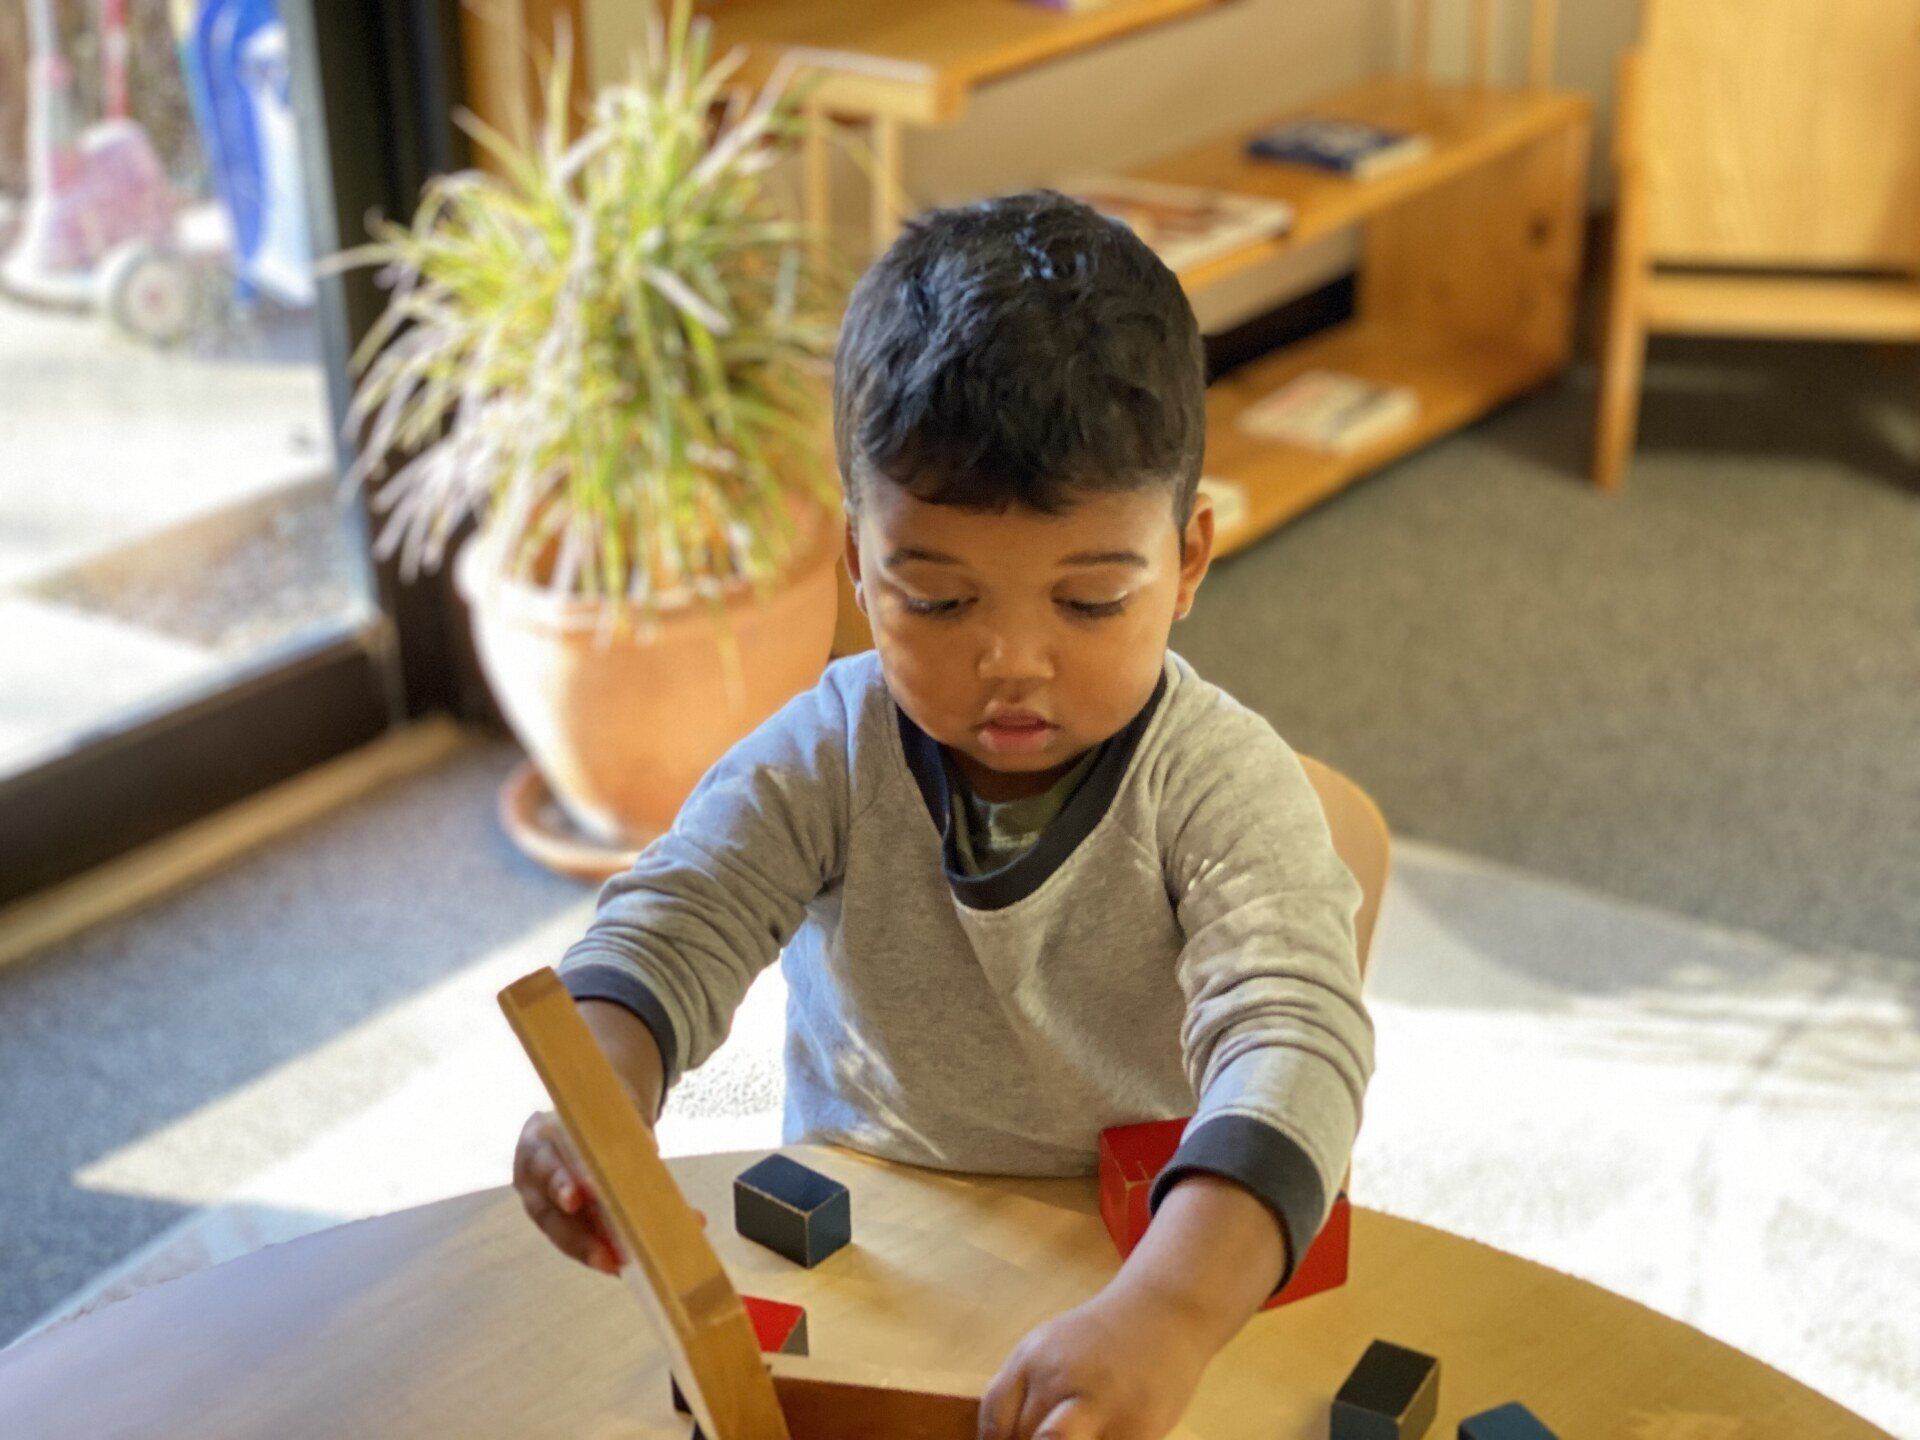 Montessori toddler working in the classroom